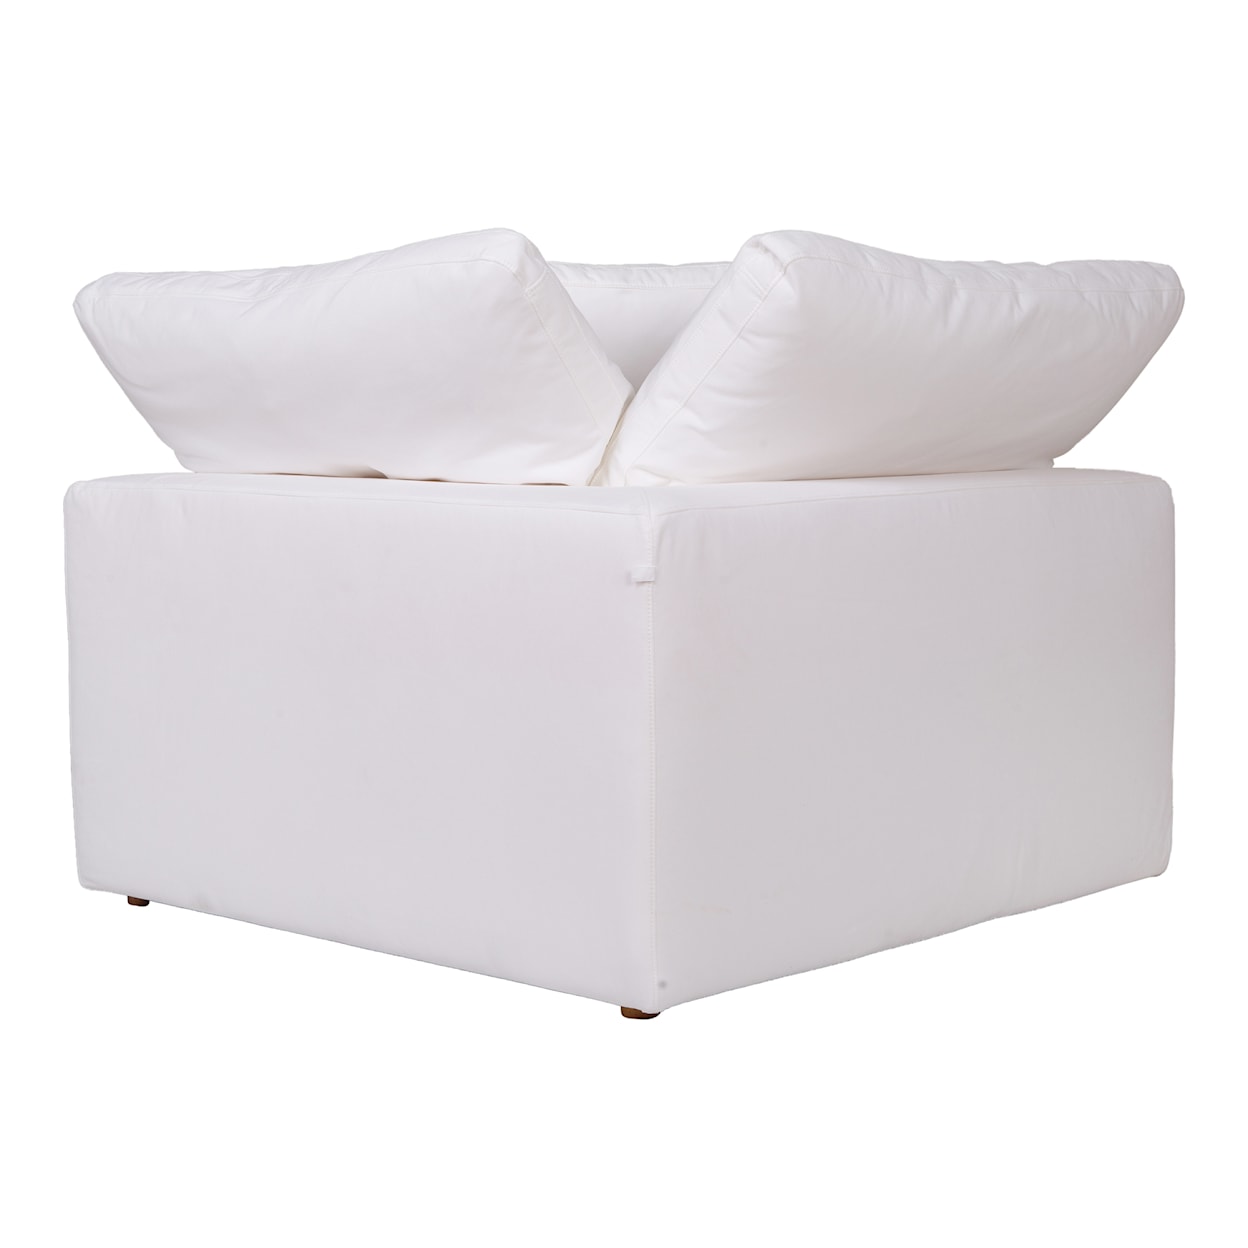 Moe's Home Collection Clay Clay Corner Chair Livesmart Fabric White